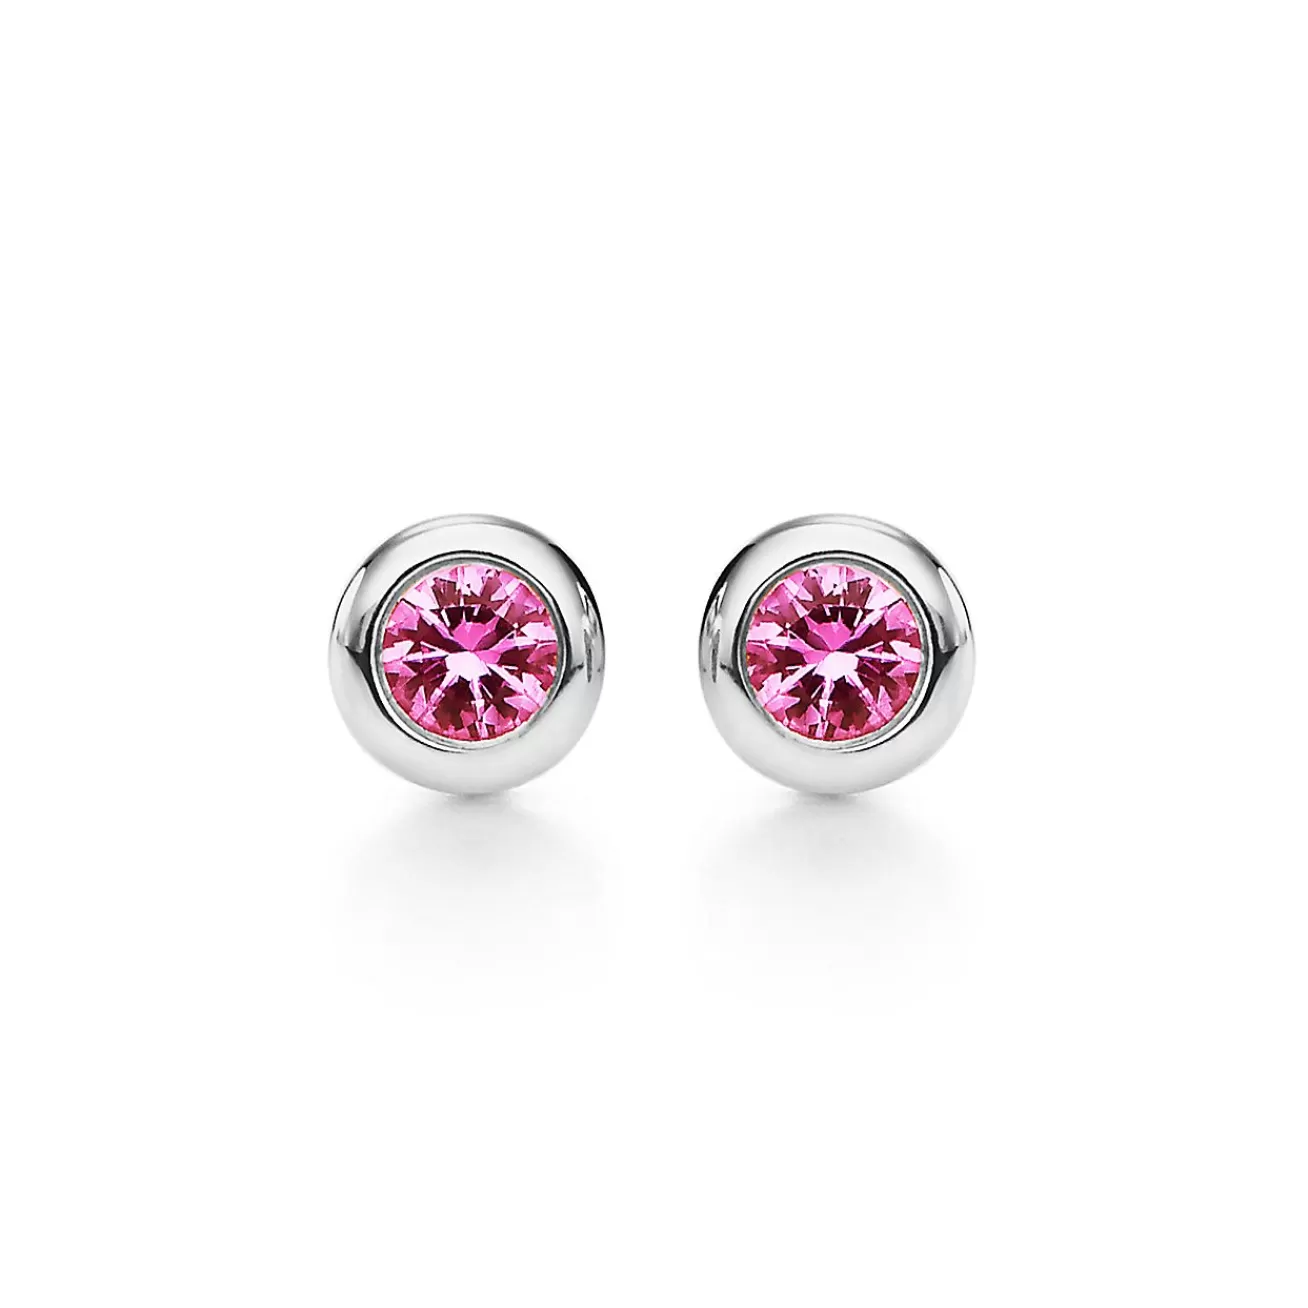 Tiffany & Co. Elsa Peretti® Color by the Yard earrings in sterling silver with pink sapphires. | ^ Earrings | Sterling Silver Jewelry